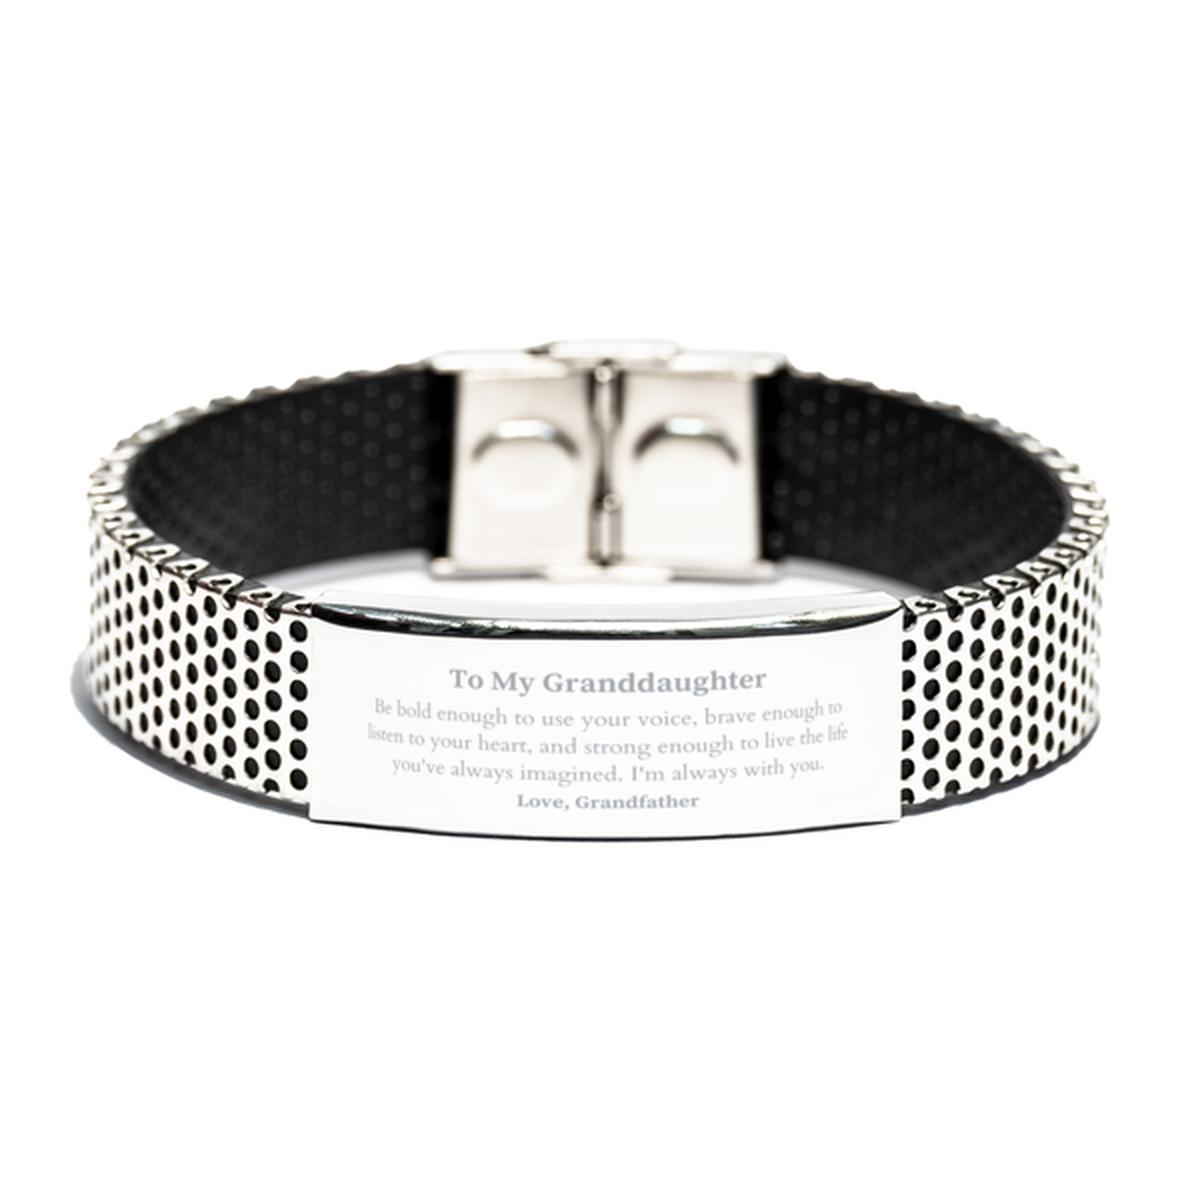 Keepsake Granddaughter Stainless Steel Bracelet Gift Idea Graduation Christmas Birthday Granddaughter from Grandfather, Granddaughter Be bold enough to use your voice, brave enough to listen to your heart. Love, Grandfather